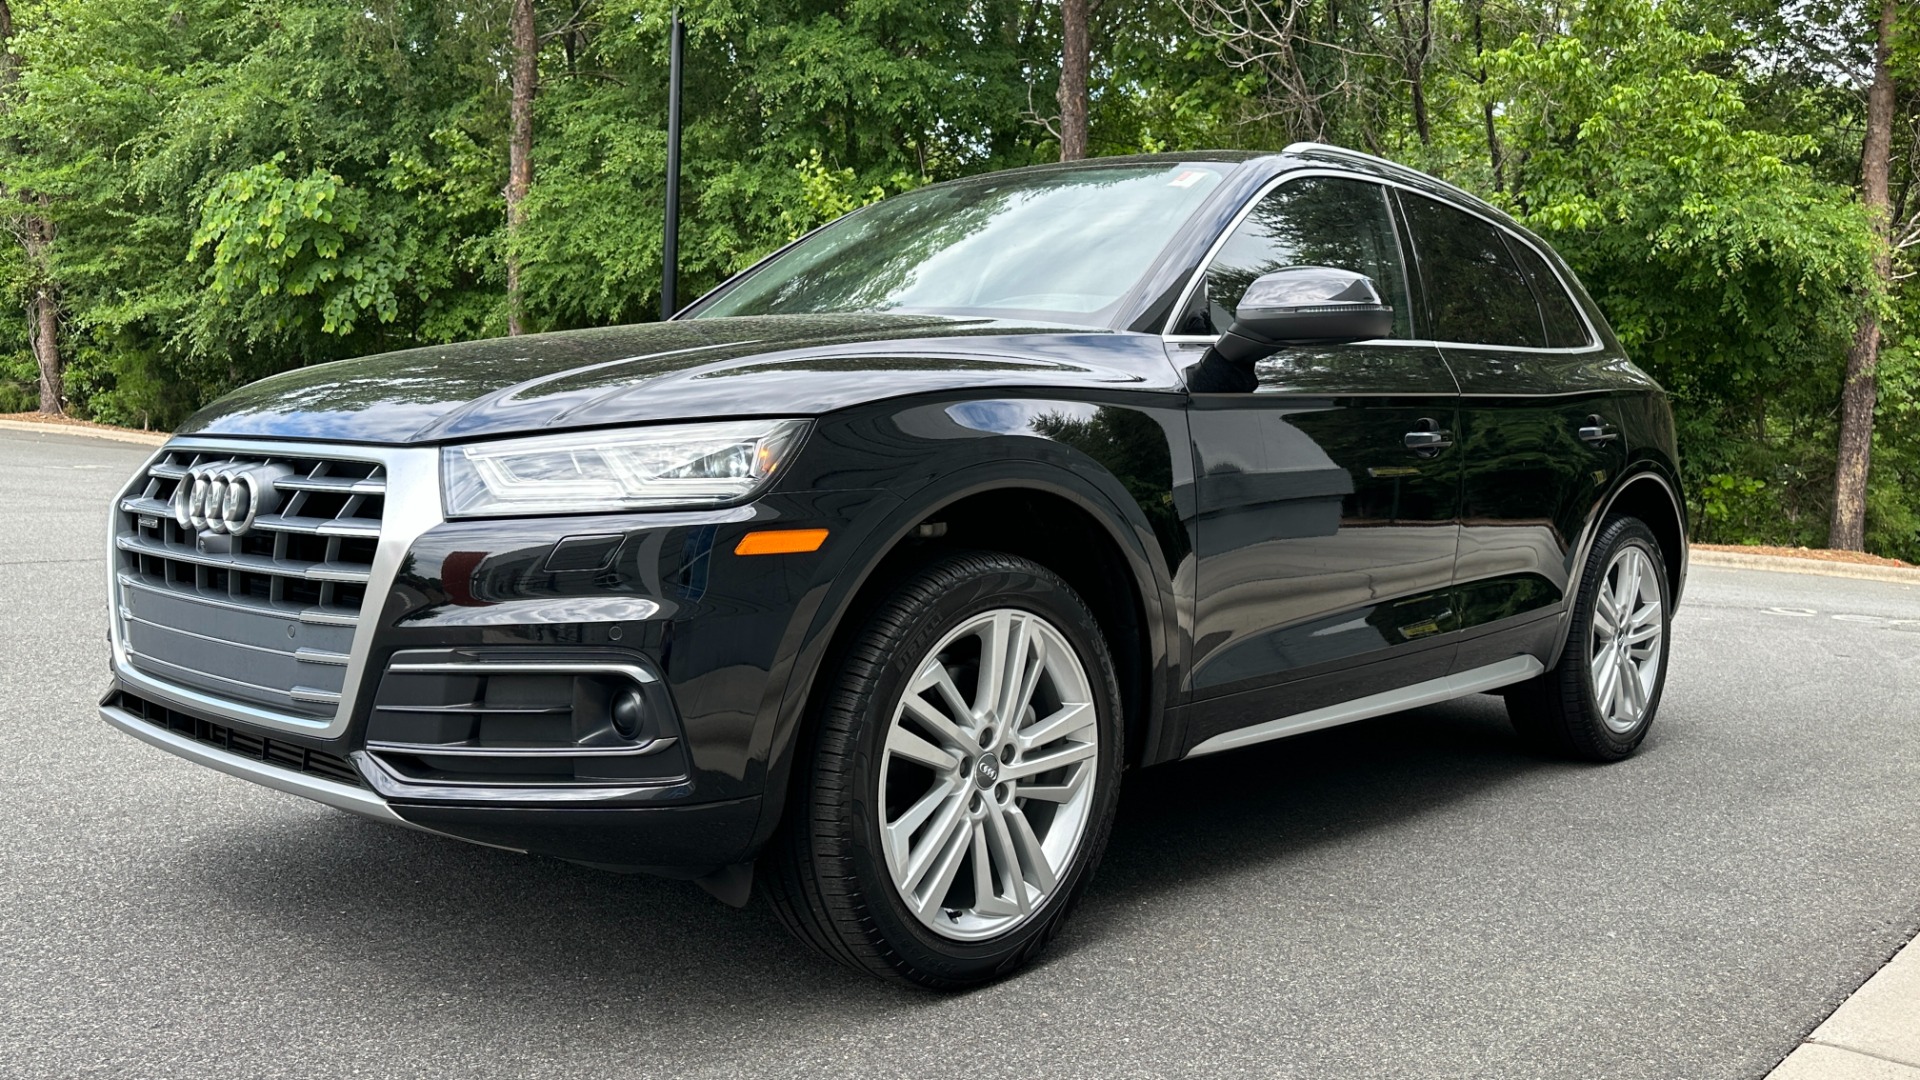 Used 2018 Audi Q5 PRESTIGE / DRIVER ASSISTANCE / COLD WEATHER / WOOD INLAYS for sale $25,995 at Formula Imports in Charlotte NC 28227 2